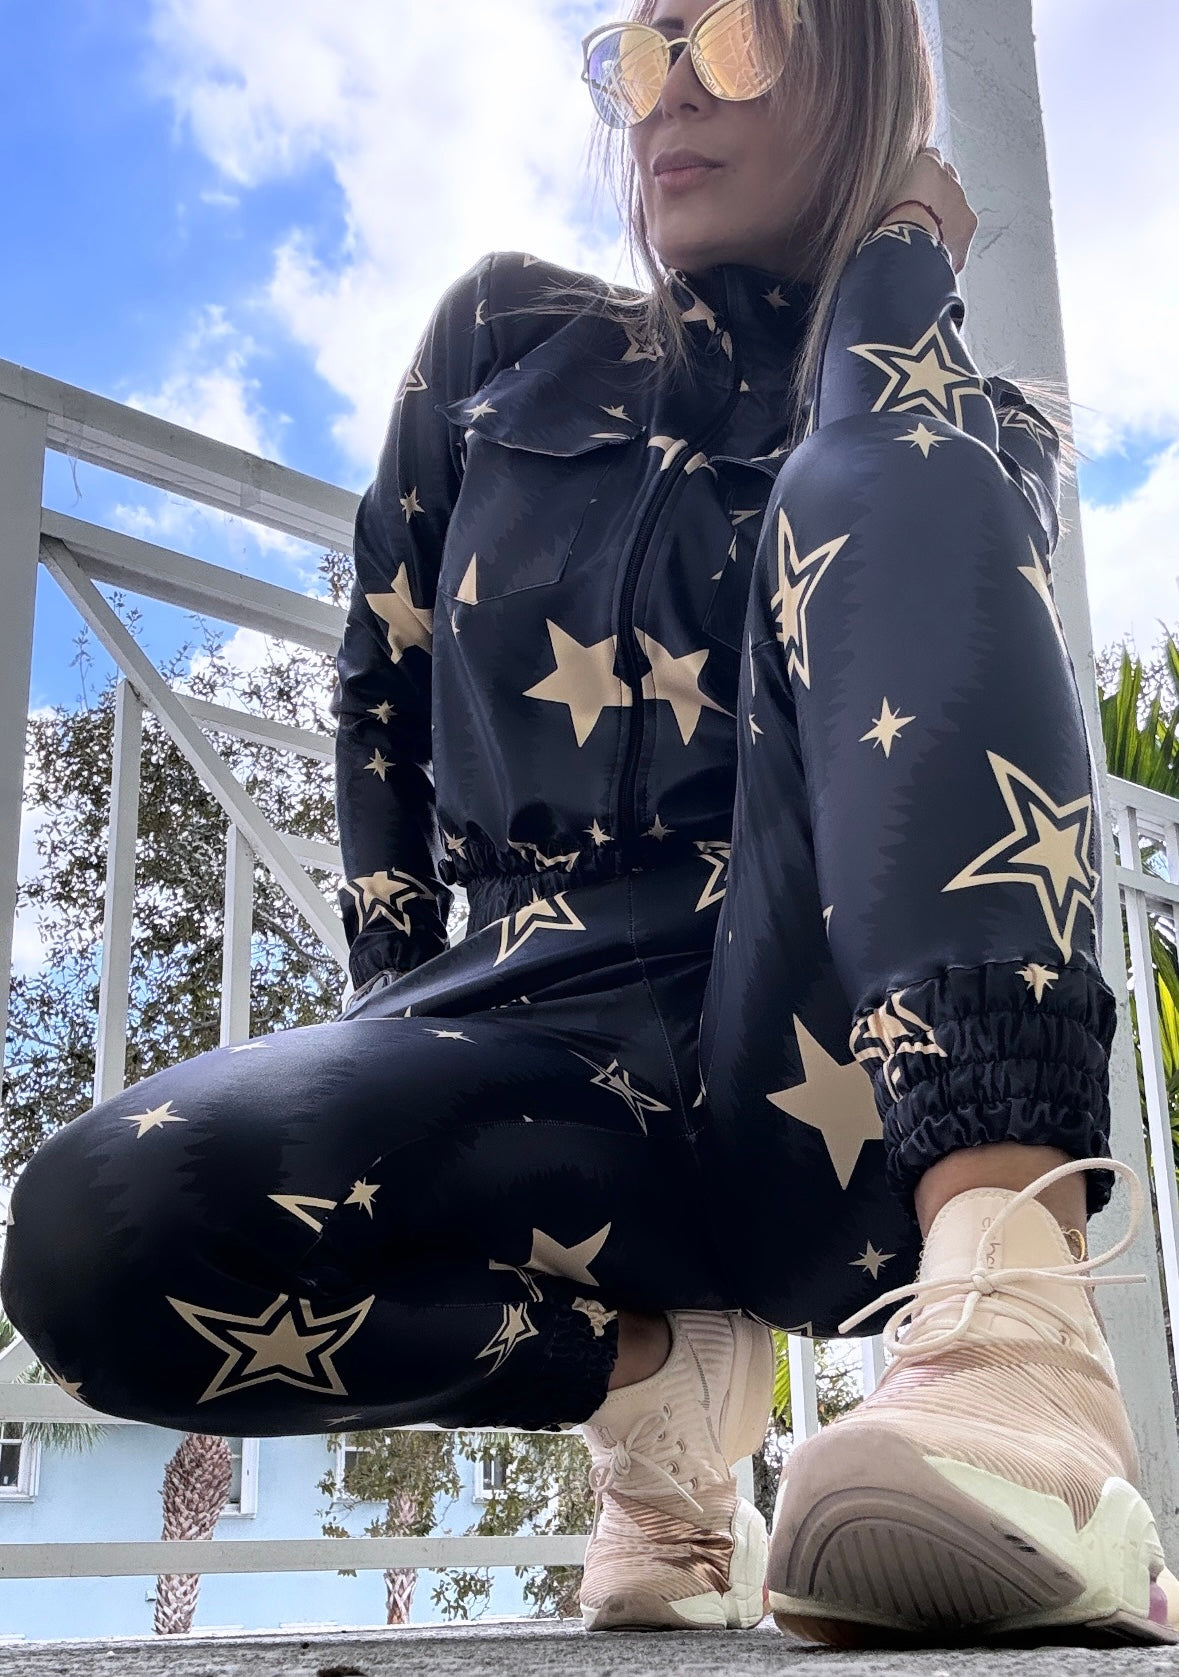 Stars Set -jacket and jogger effect leather